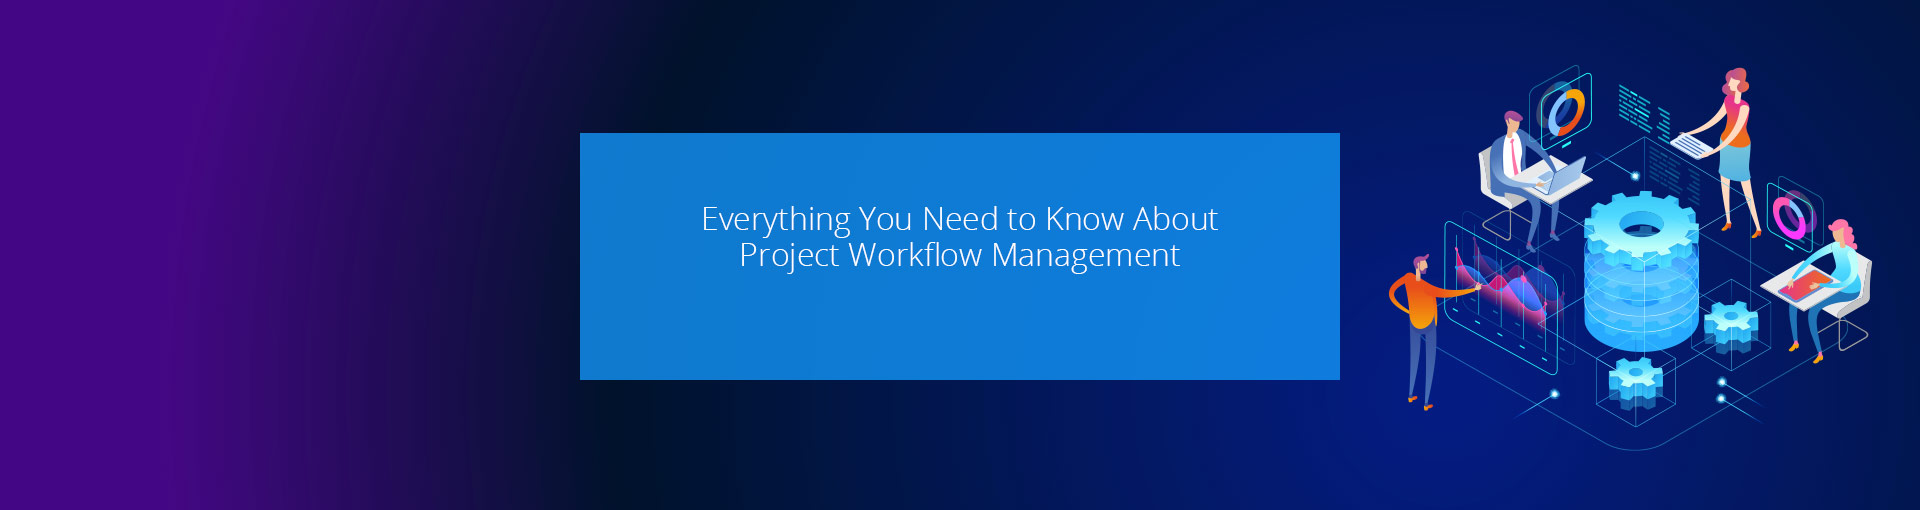 Everything You Need to Know About Project Workflow Management Featured Image